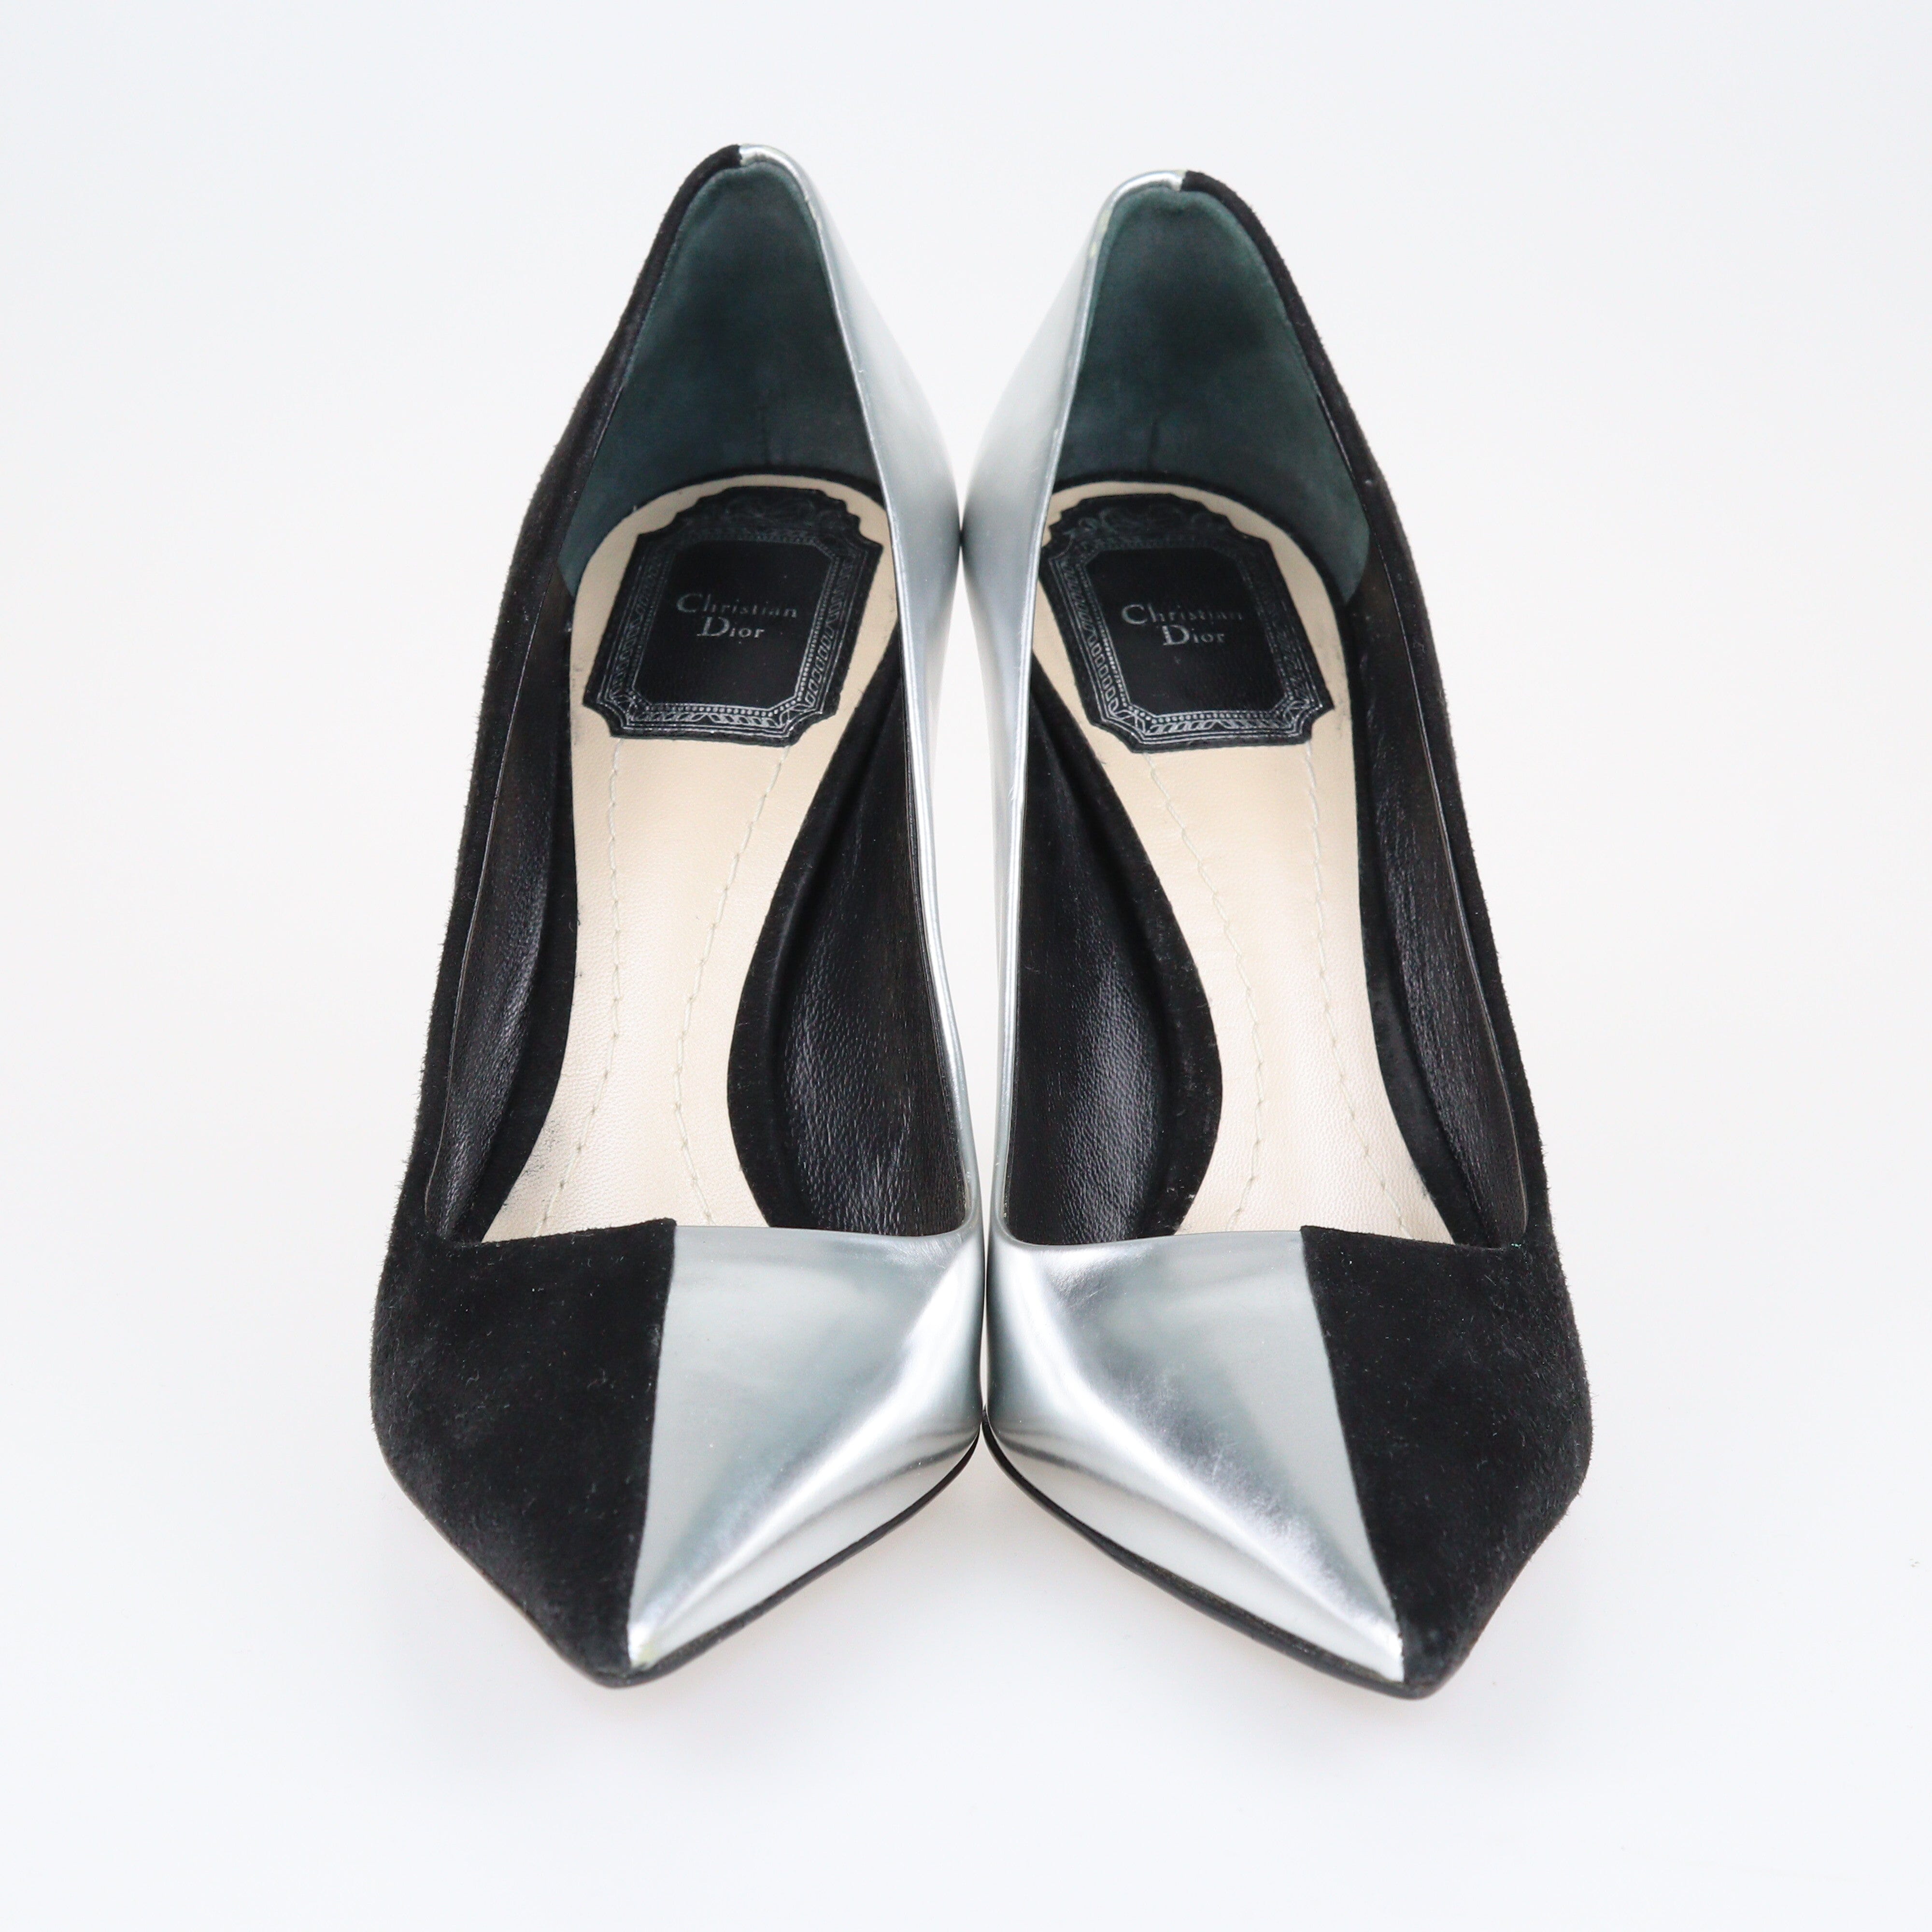 Black/Silver Pointed Toe Pumps Shoes Christian Dior 